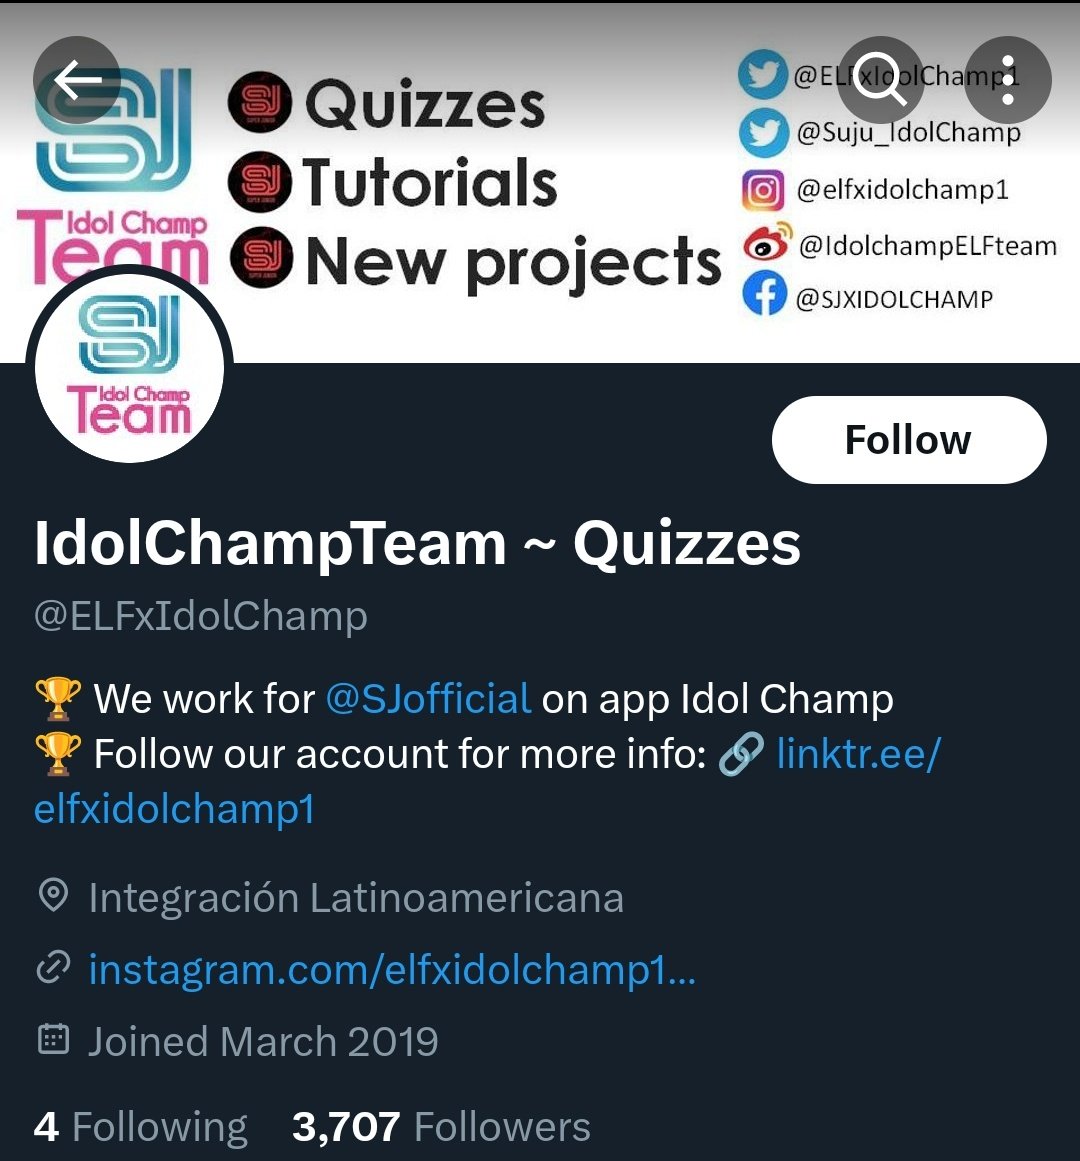 stay follow @/ELFxIdolChamp. they post answers for sc quizzes. for one quizz you can get 20 blue chamsims. remember to use only blue chamsims for monthly chart and save the Red ones for sc prevotings